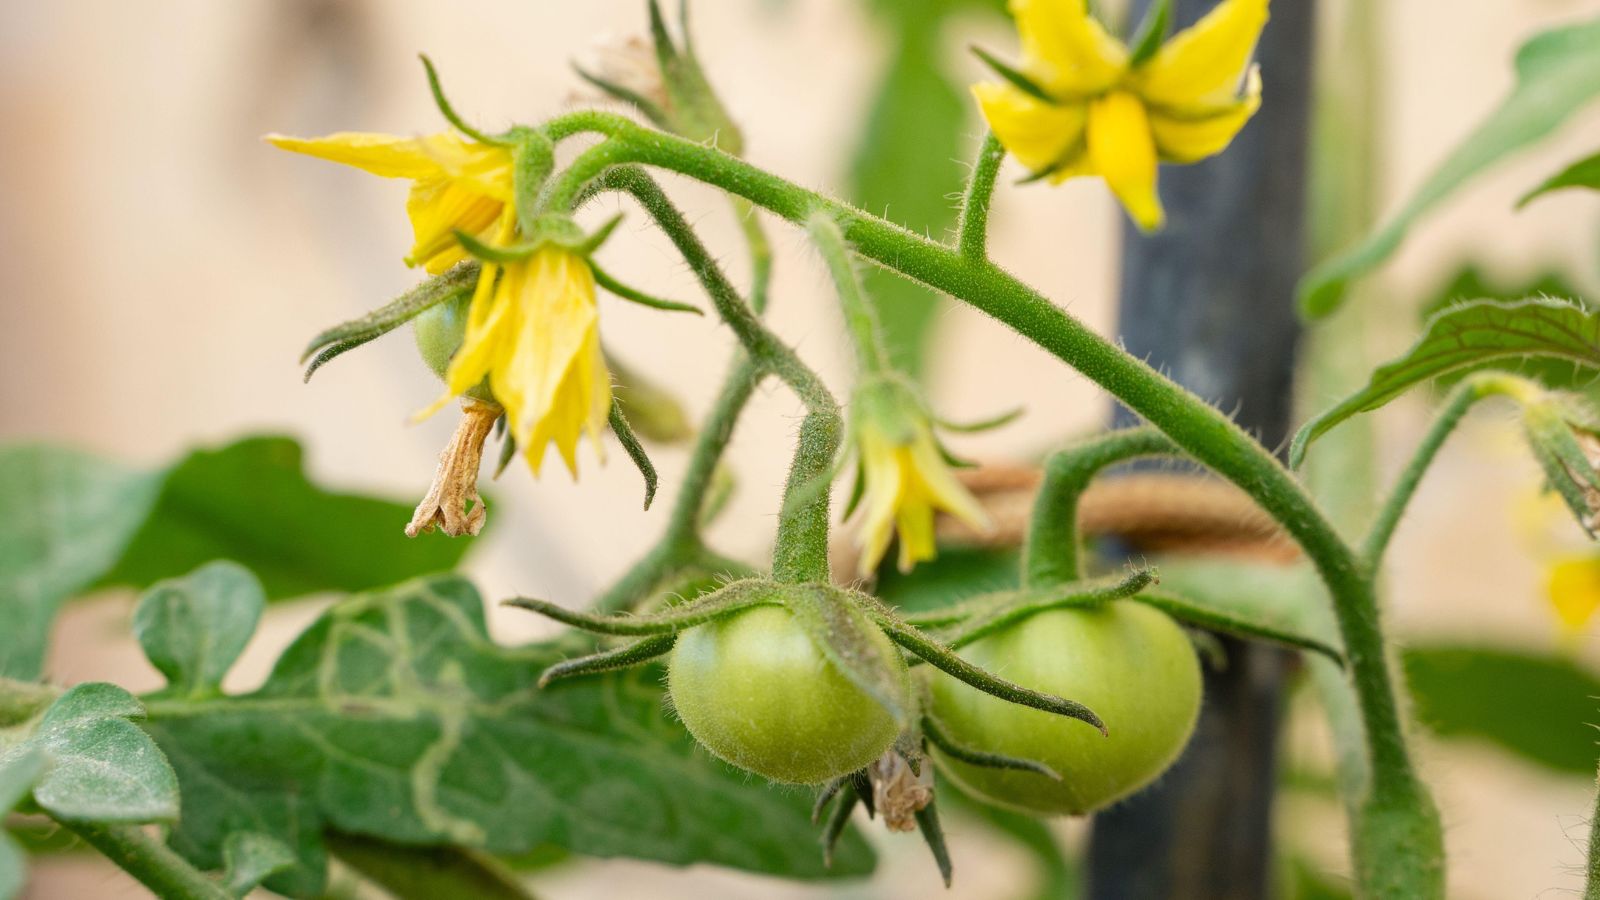 Tomato tapping: how to get a bigger, healthier crop